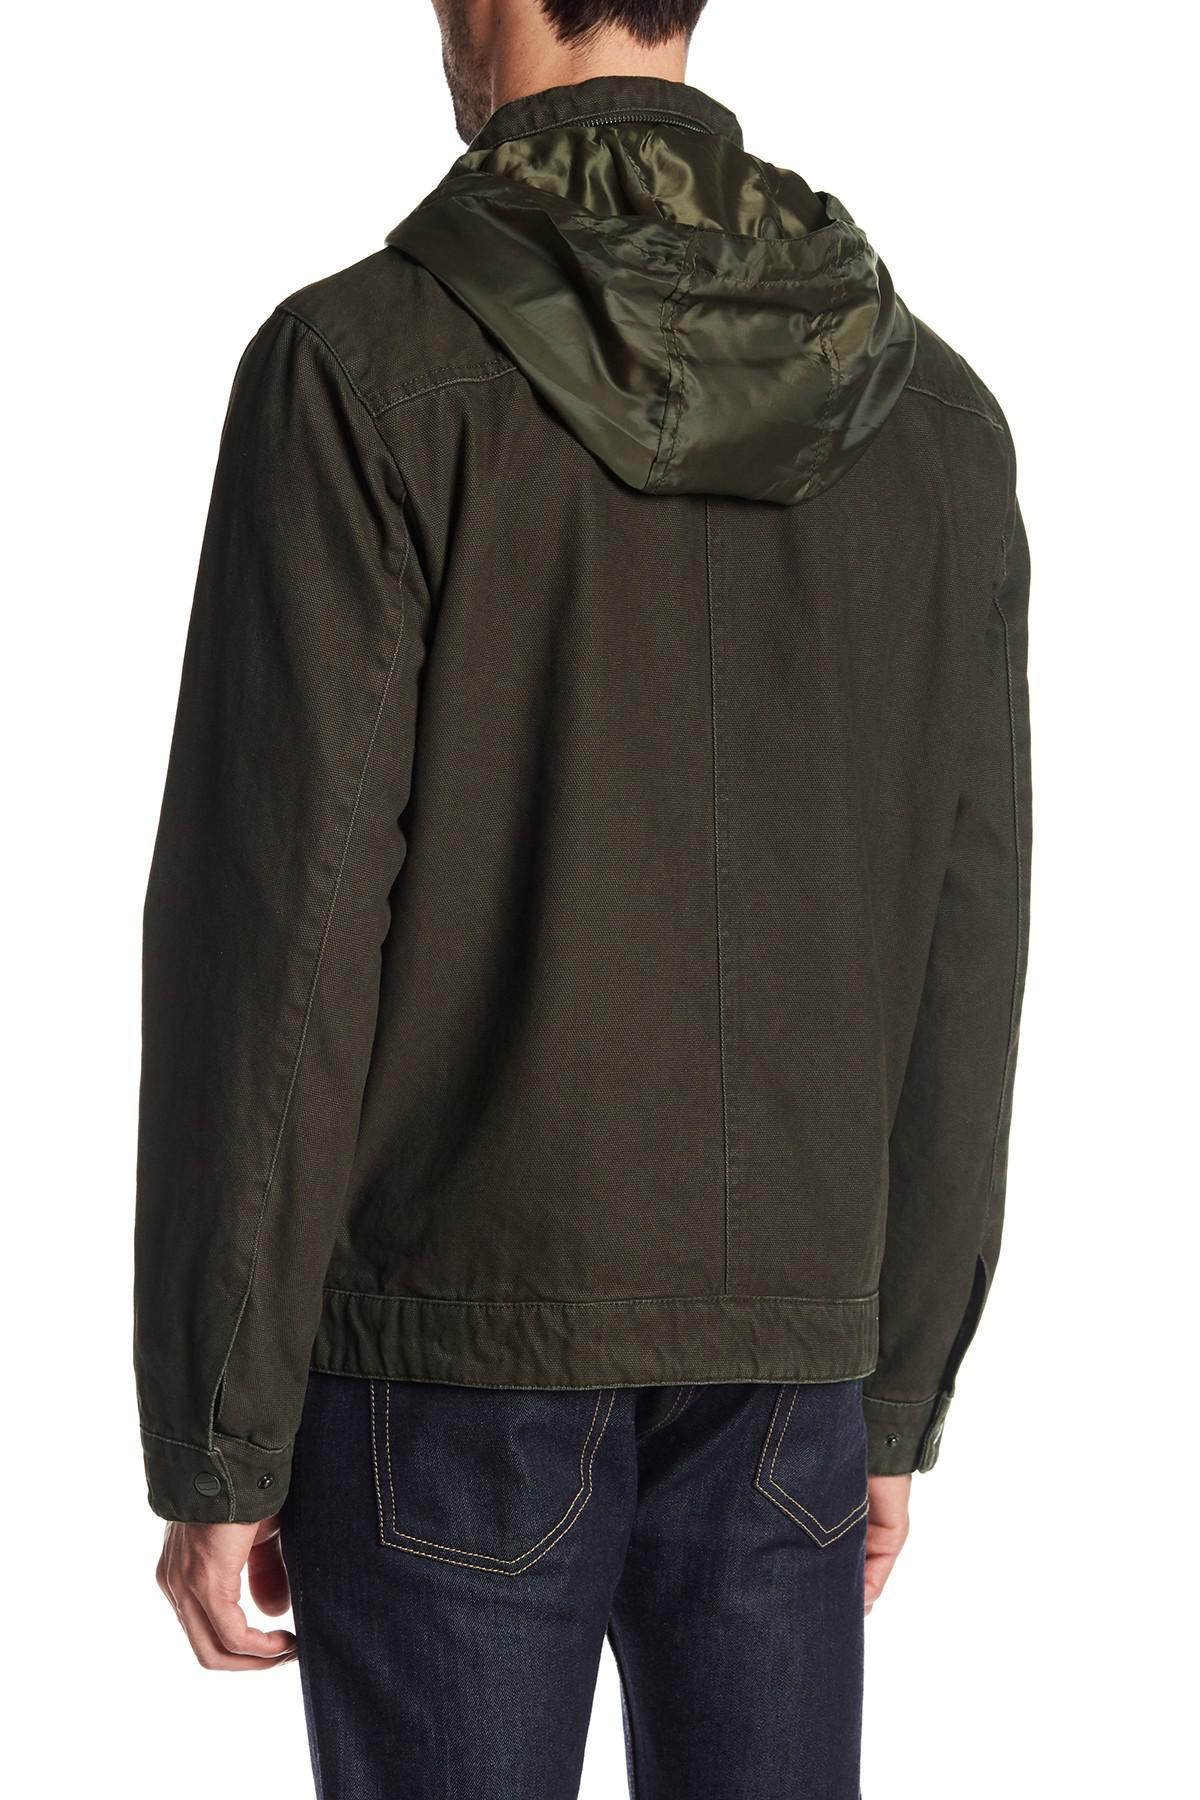 Lyst - Levi'S Canvas Jacket in Green for Men